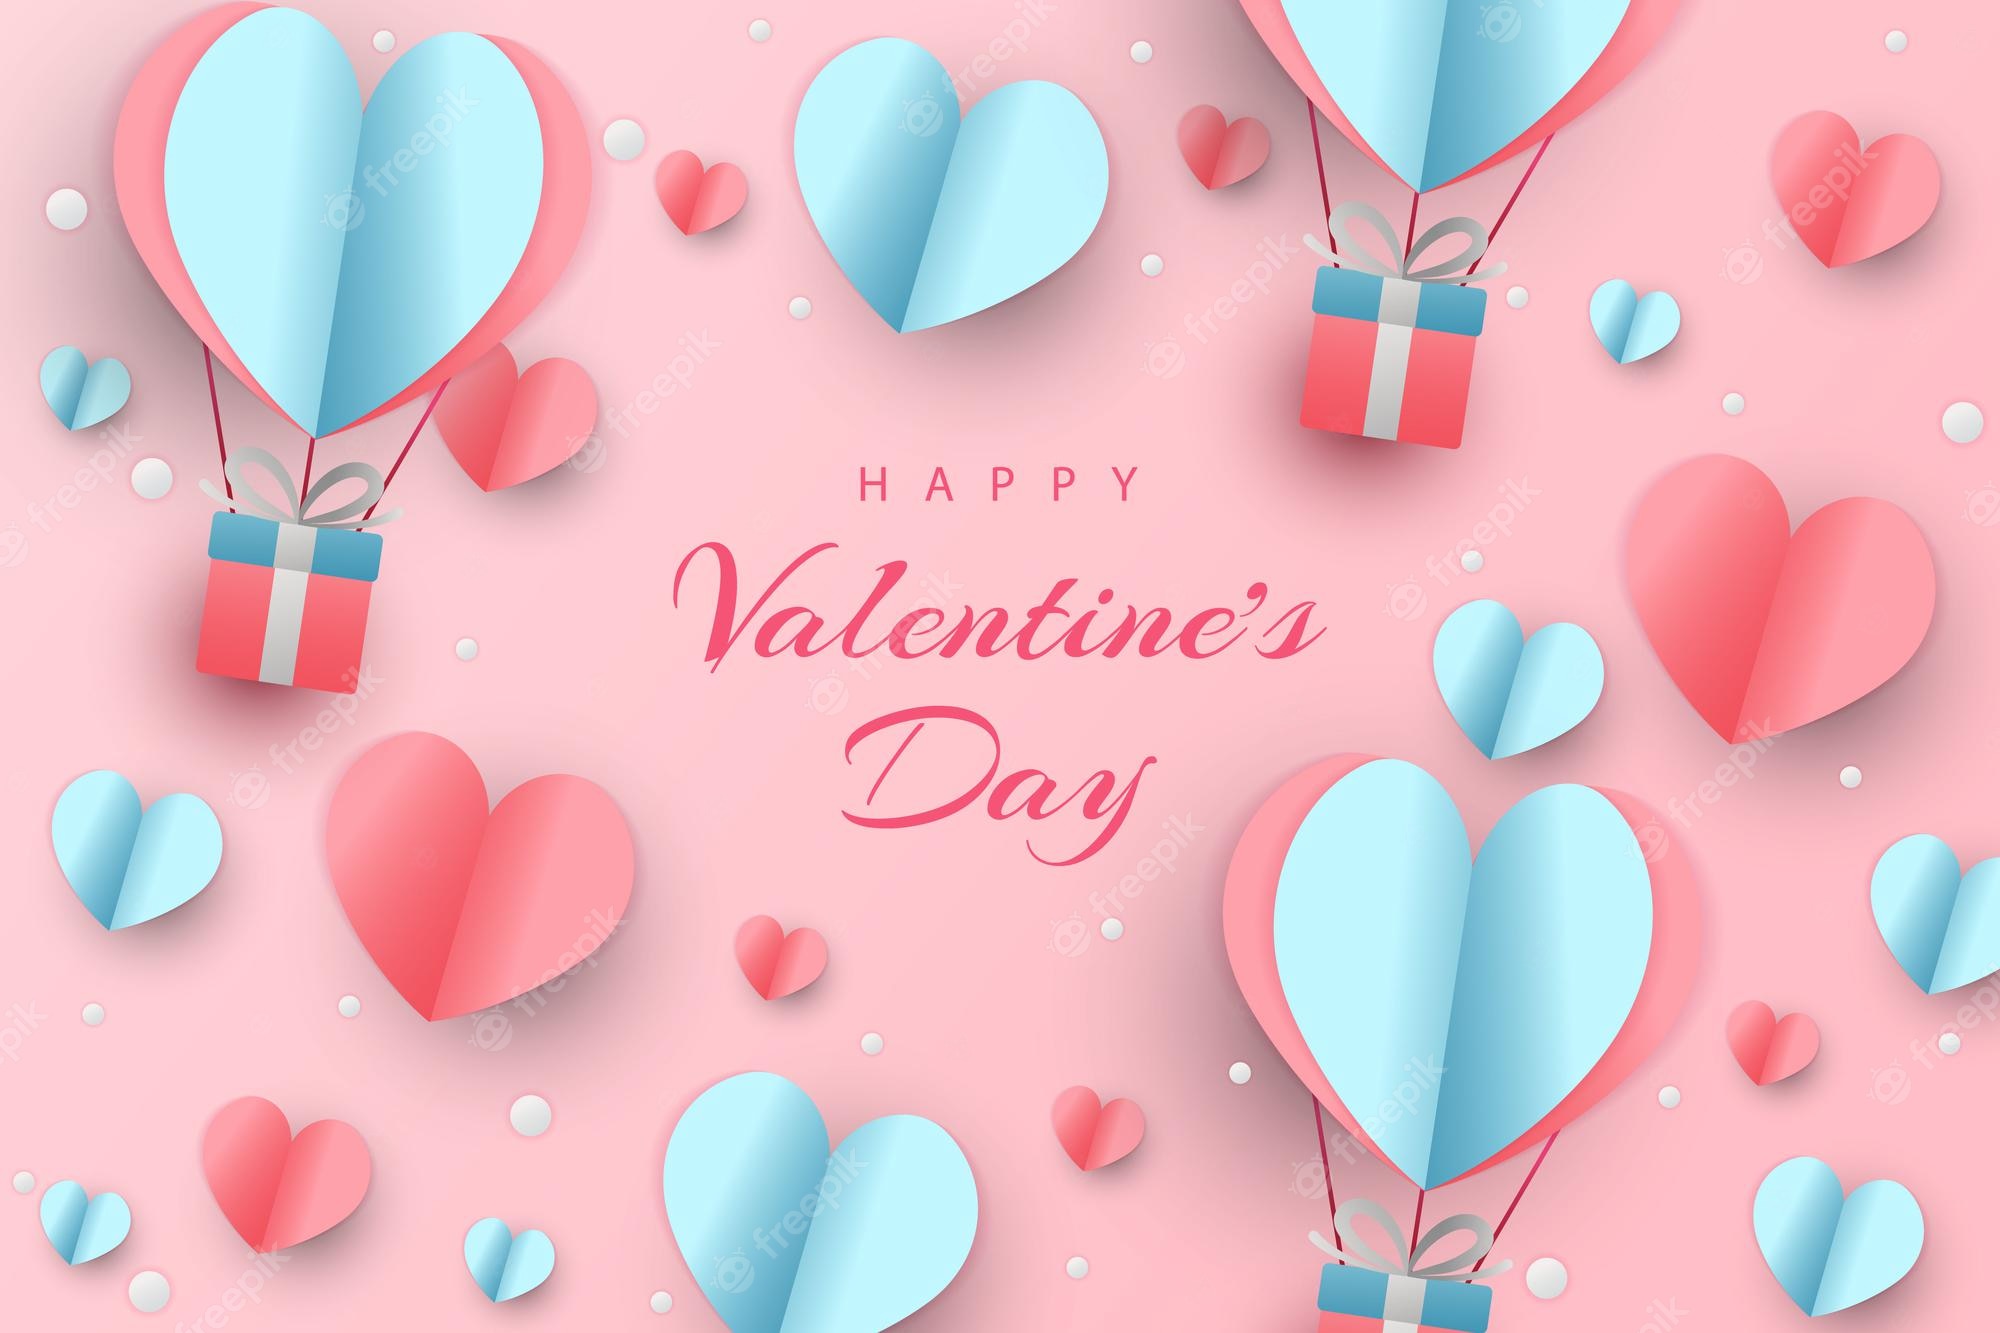 Premium Vector. Happy valentine's day background with paper cut style